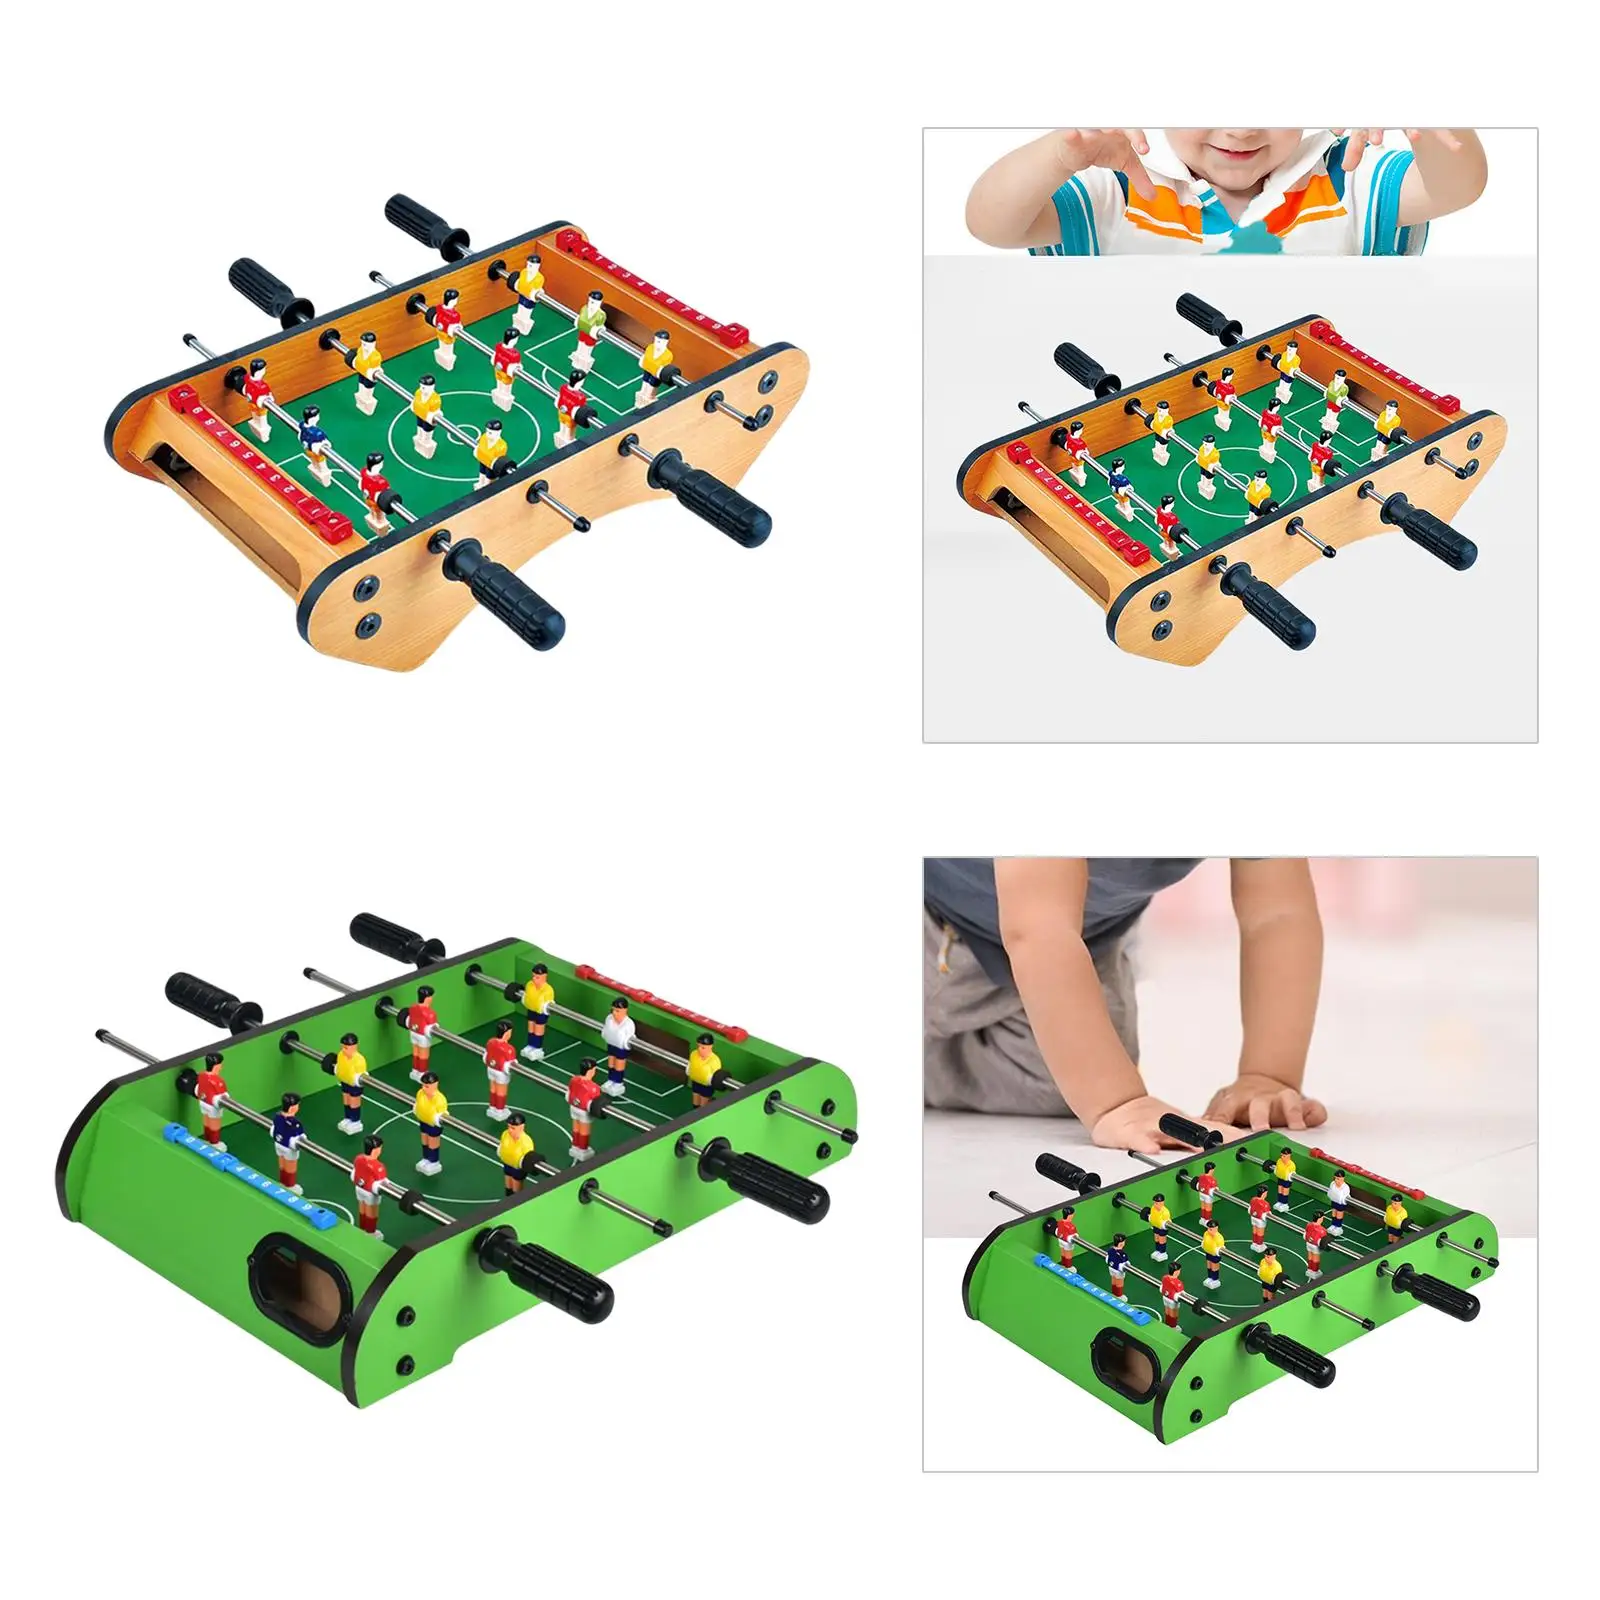 Tabletop Football Soccer Pinball Games with Ball Interesting Desktop Game for Travel